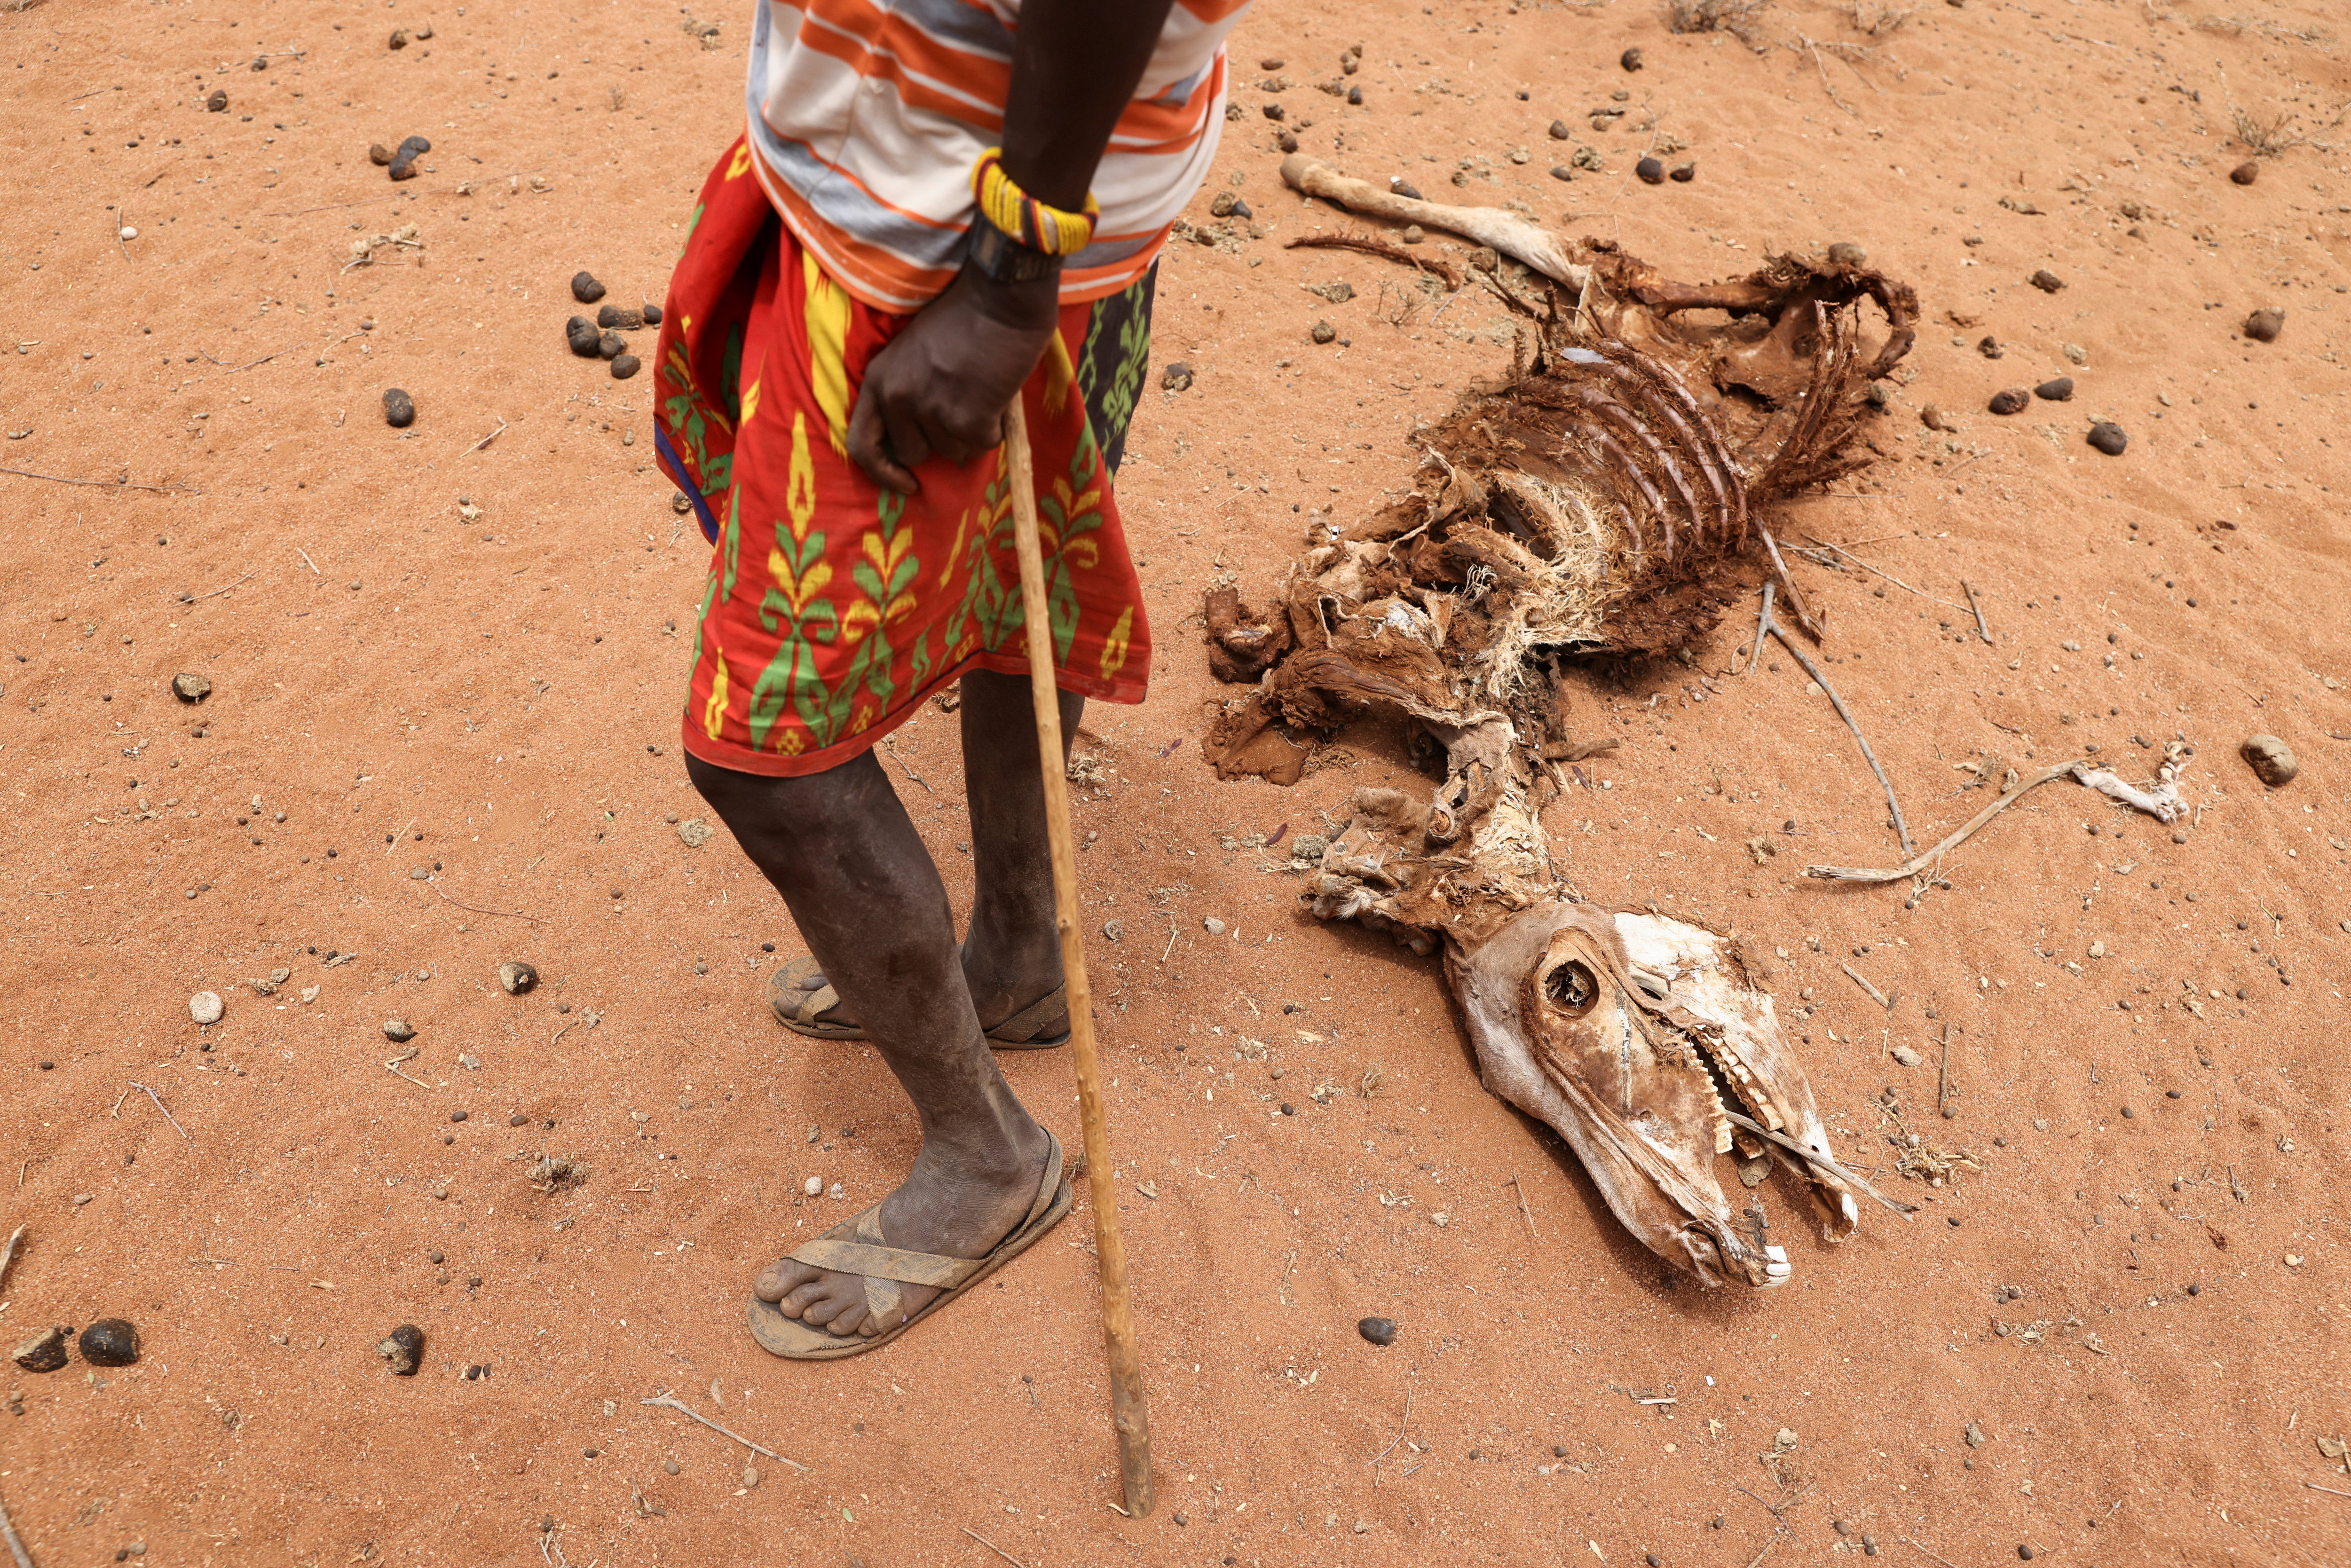 Bargeri, a herdsman from the Rendille ethnic group, stands next to the carcass of  his donkey who died due to an ongoing drought, near the town of Kargi, Marsabit county, Kenya, October 9, 2021. Picture taken October 9, 2021. REUTERS/Baz Ratner/File Photo